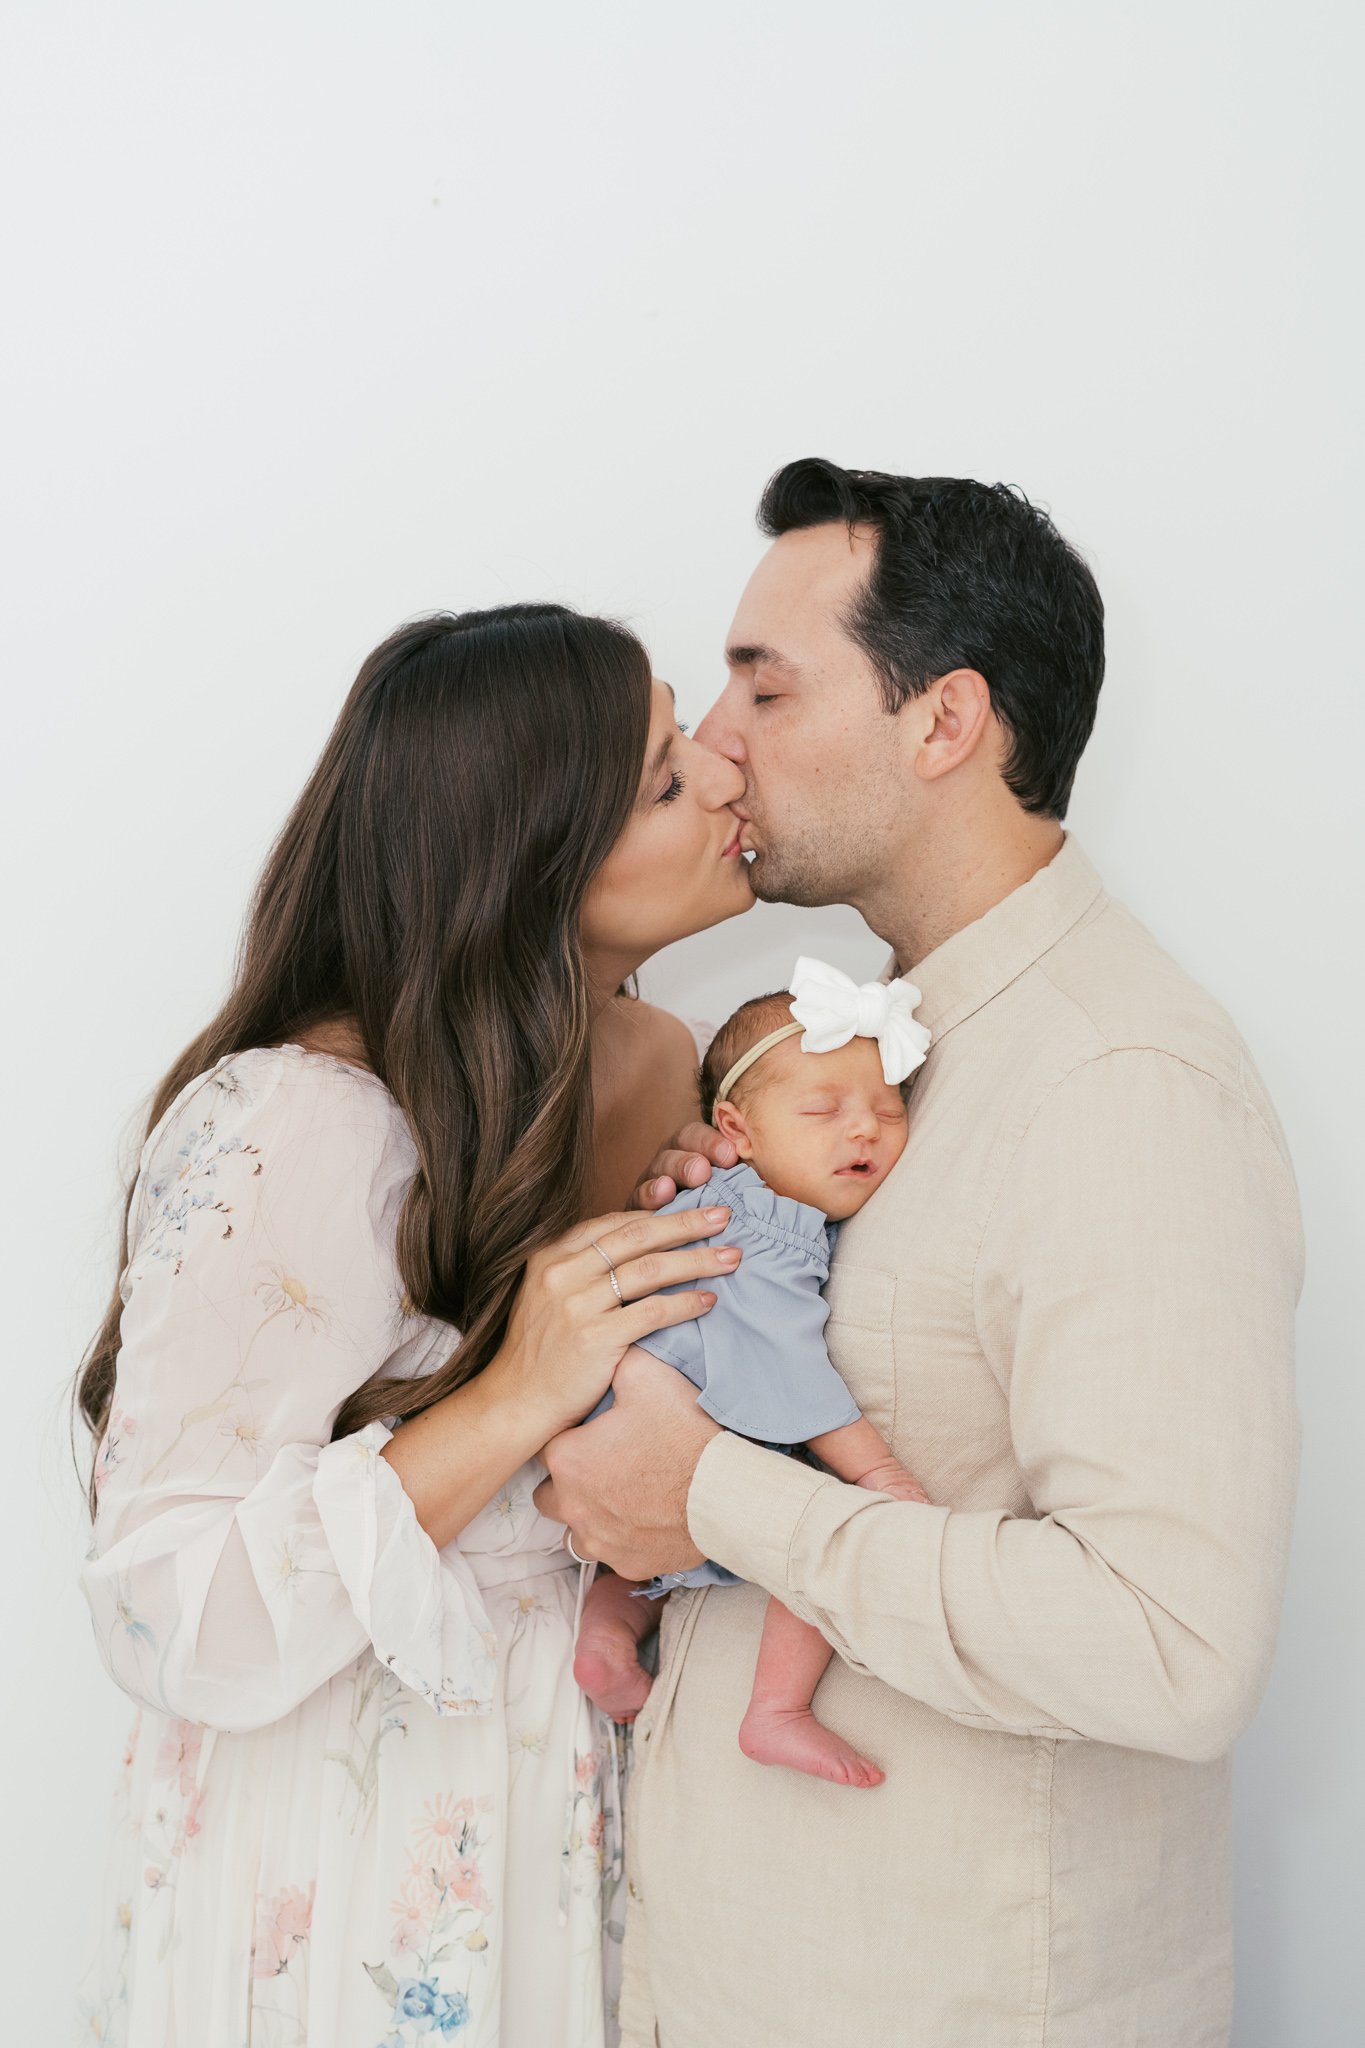 New Parents Kissing while holding new baby Girl during newborn photos